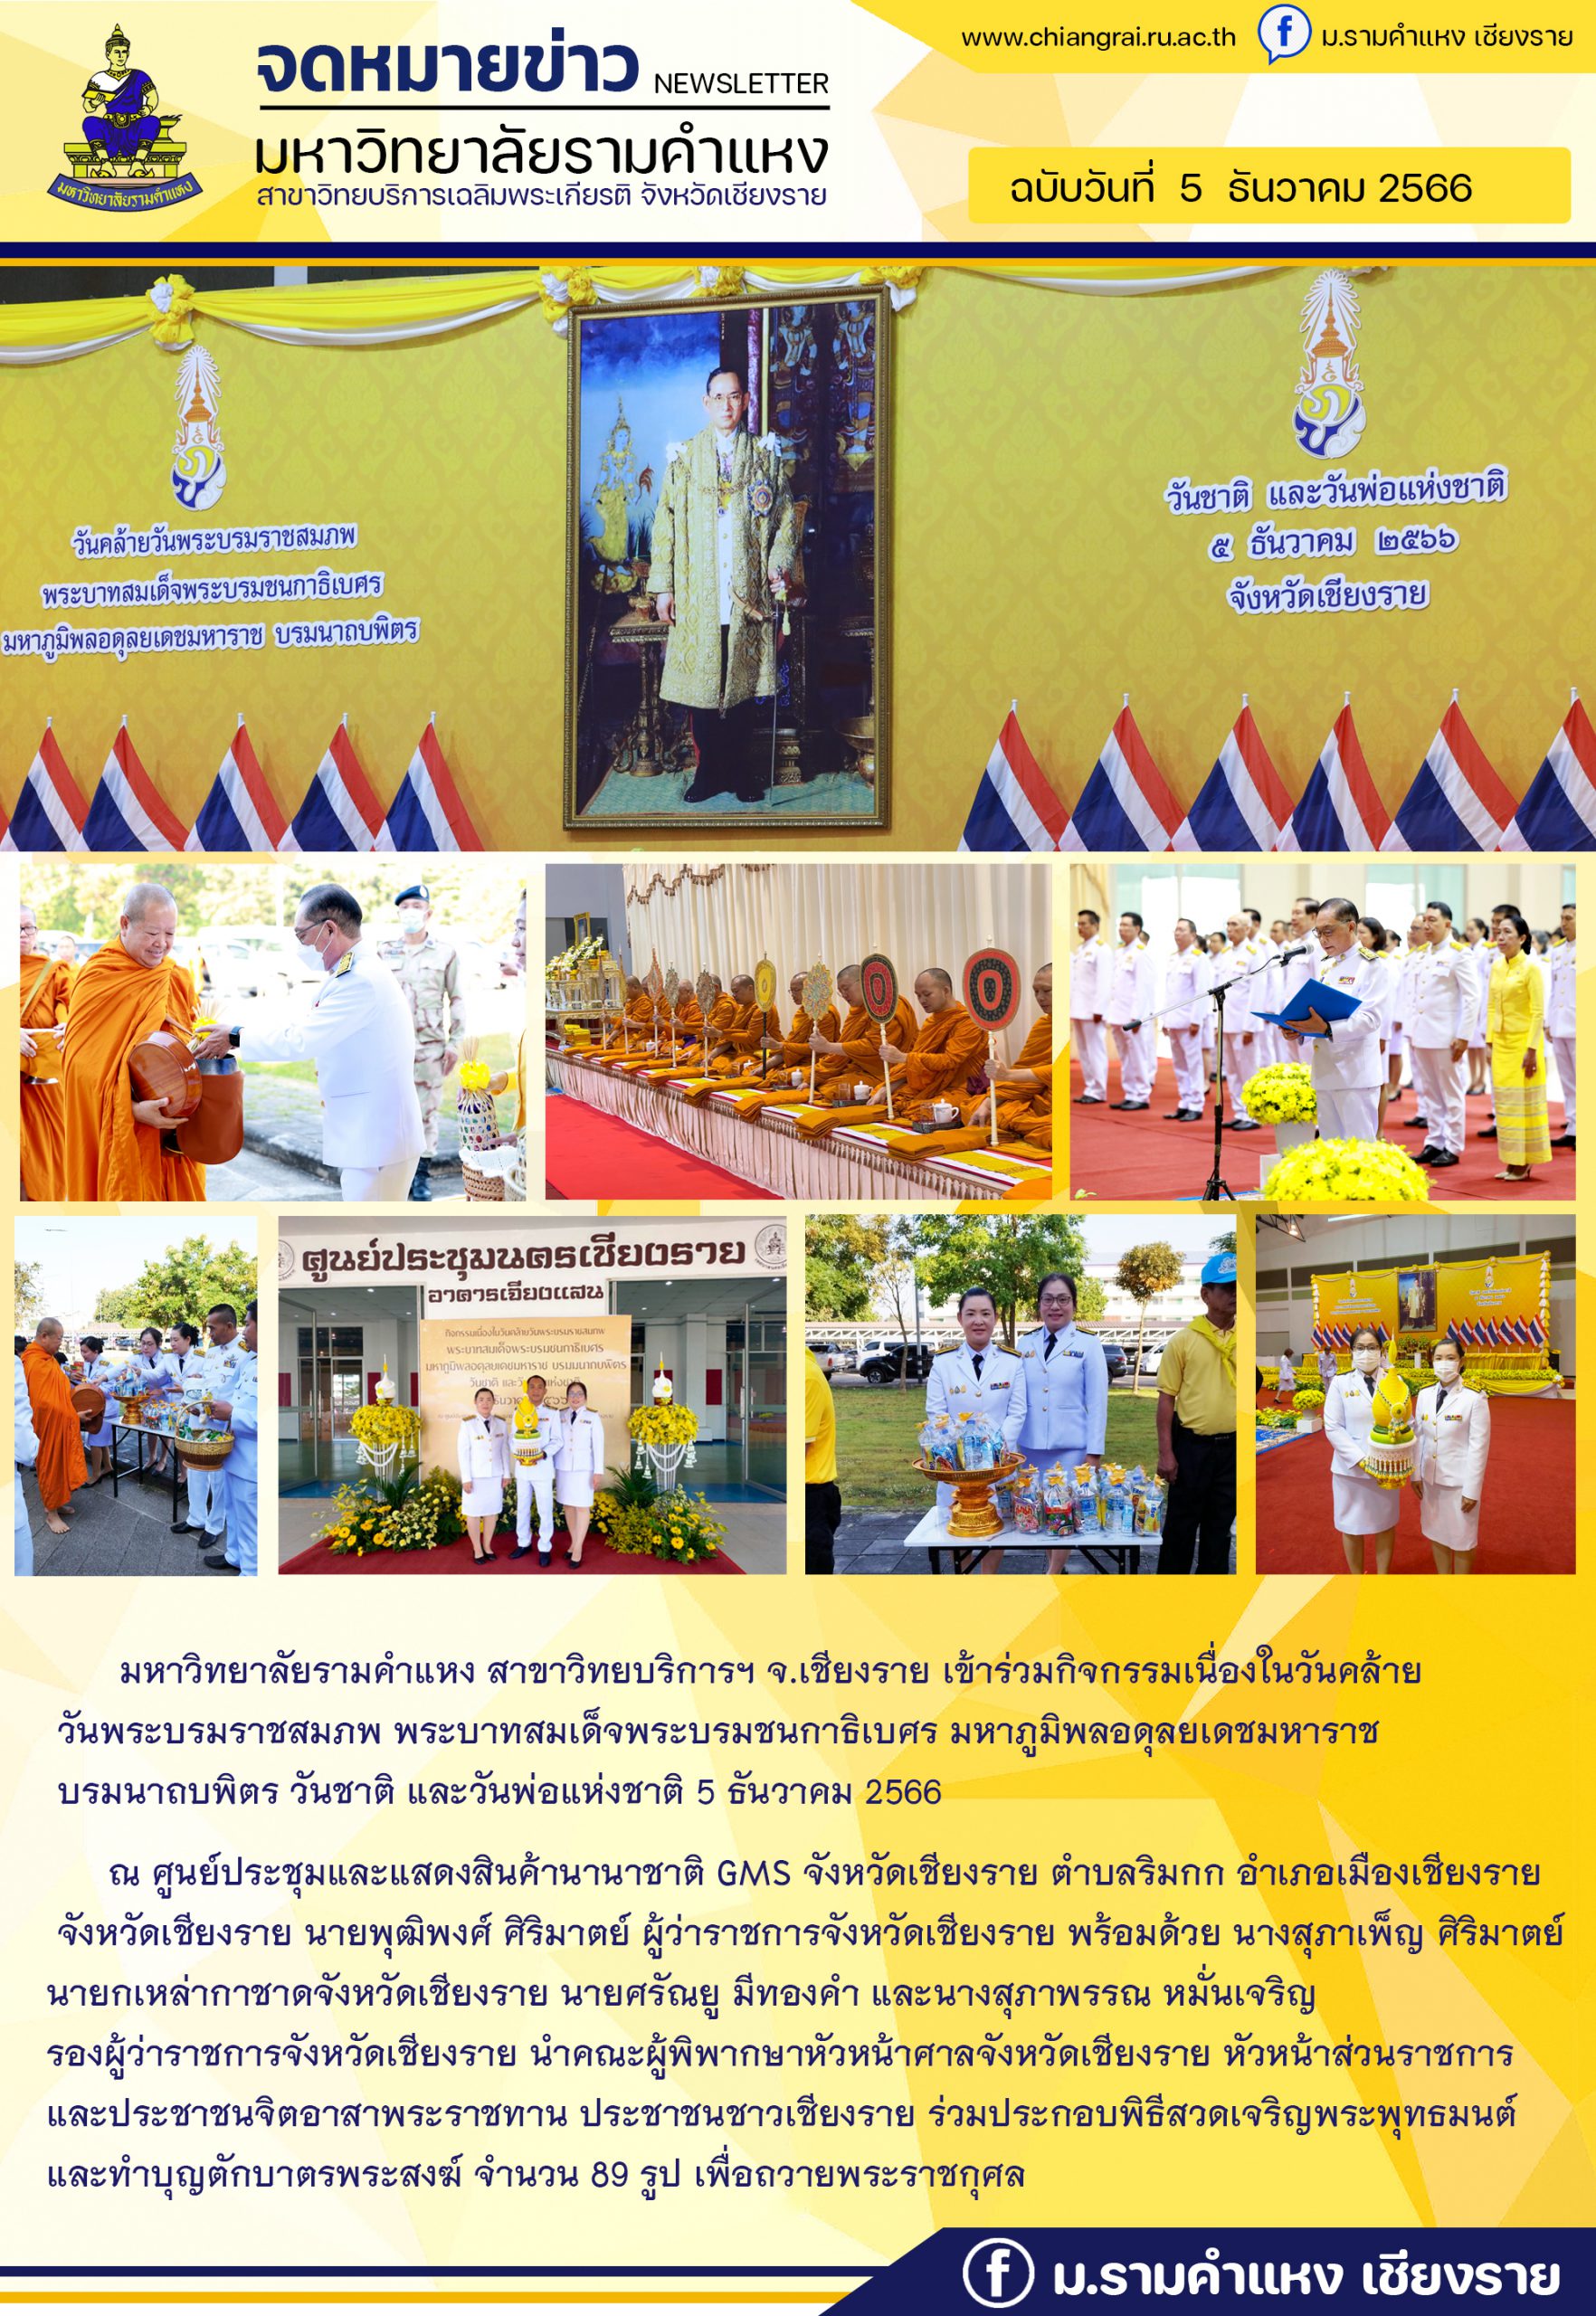 His Majesty the King’s birthday His Majesty King Bhumibol Adulyadej His Majesty Bhumibol Adulyadej the Great Borommanat Bophit